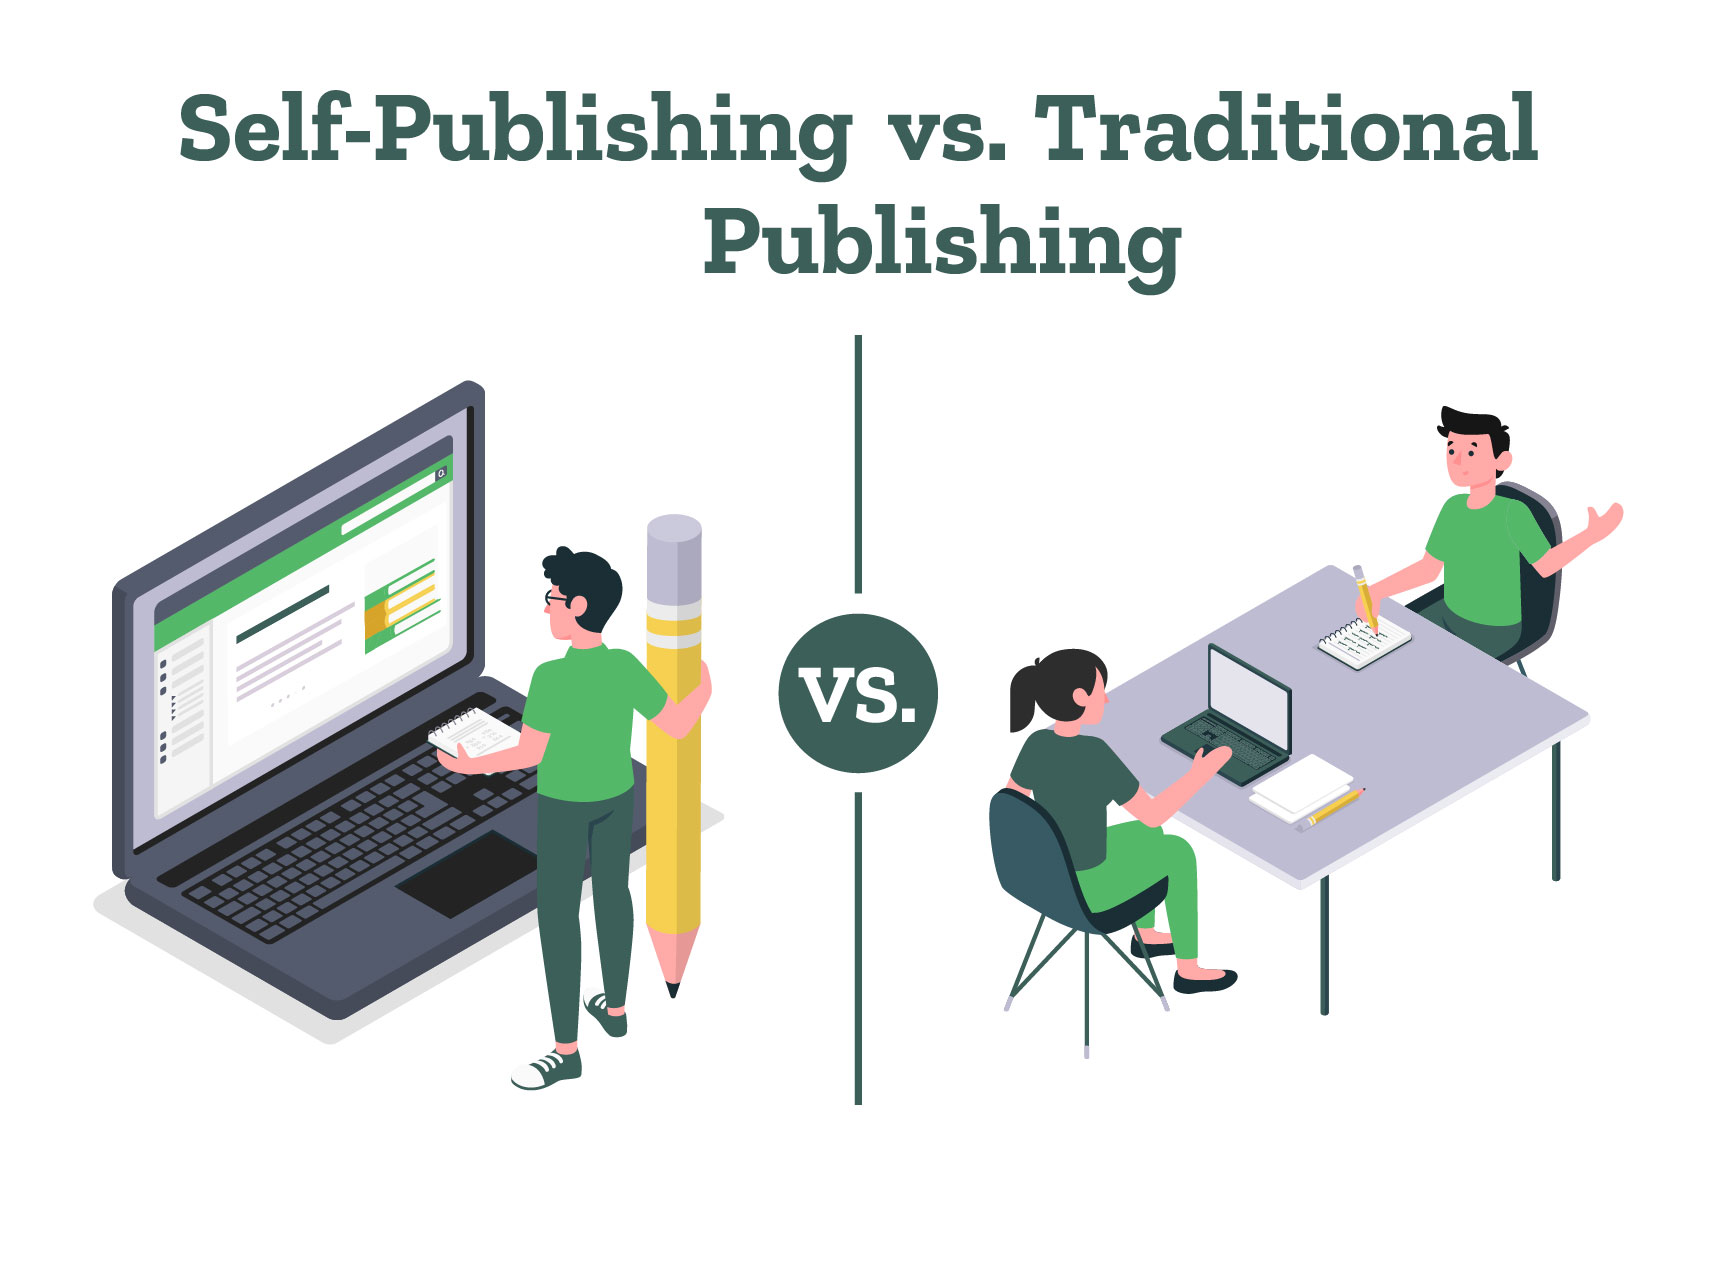 Authors can be seen choosing between self-publishing vs. traditional publishing.